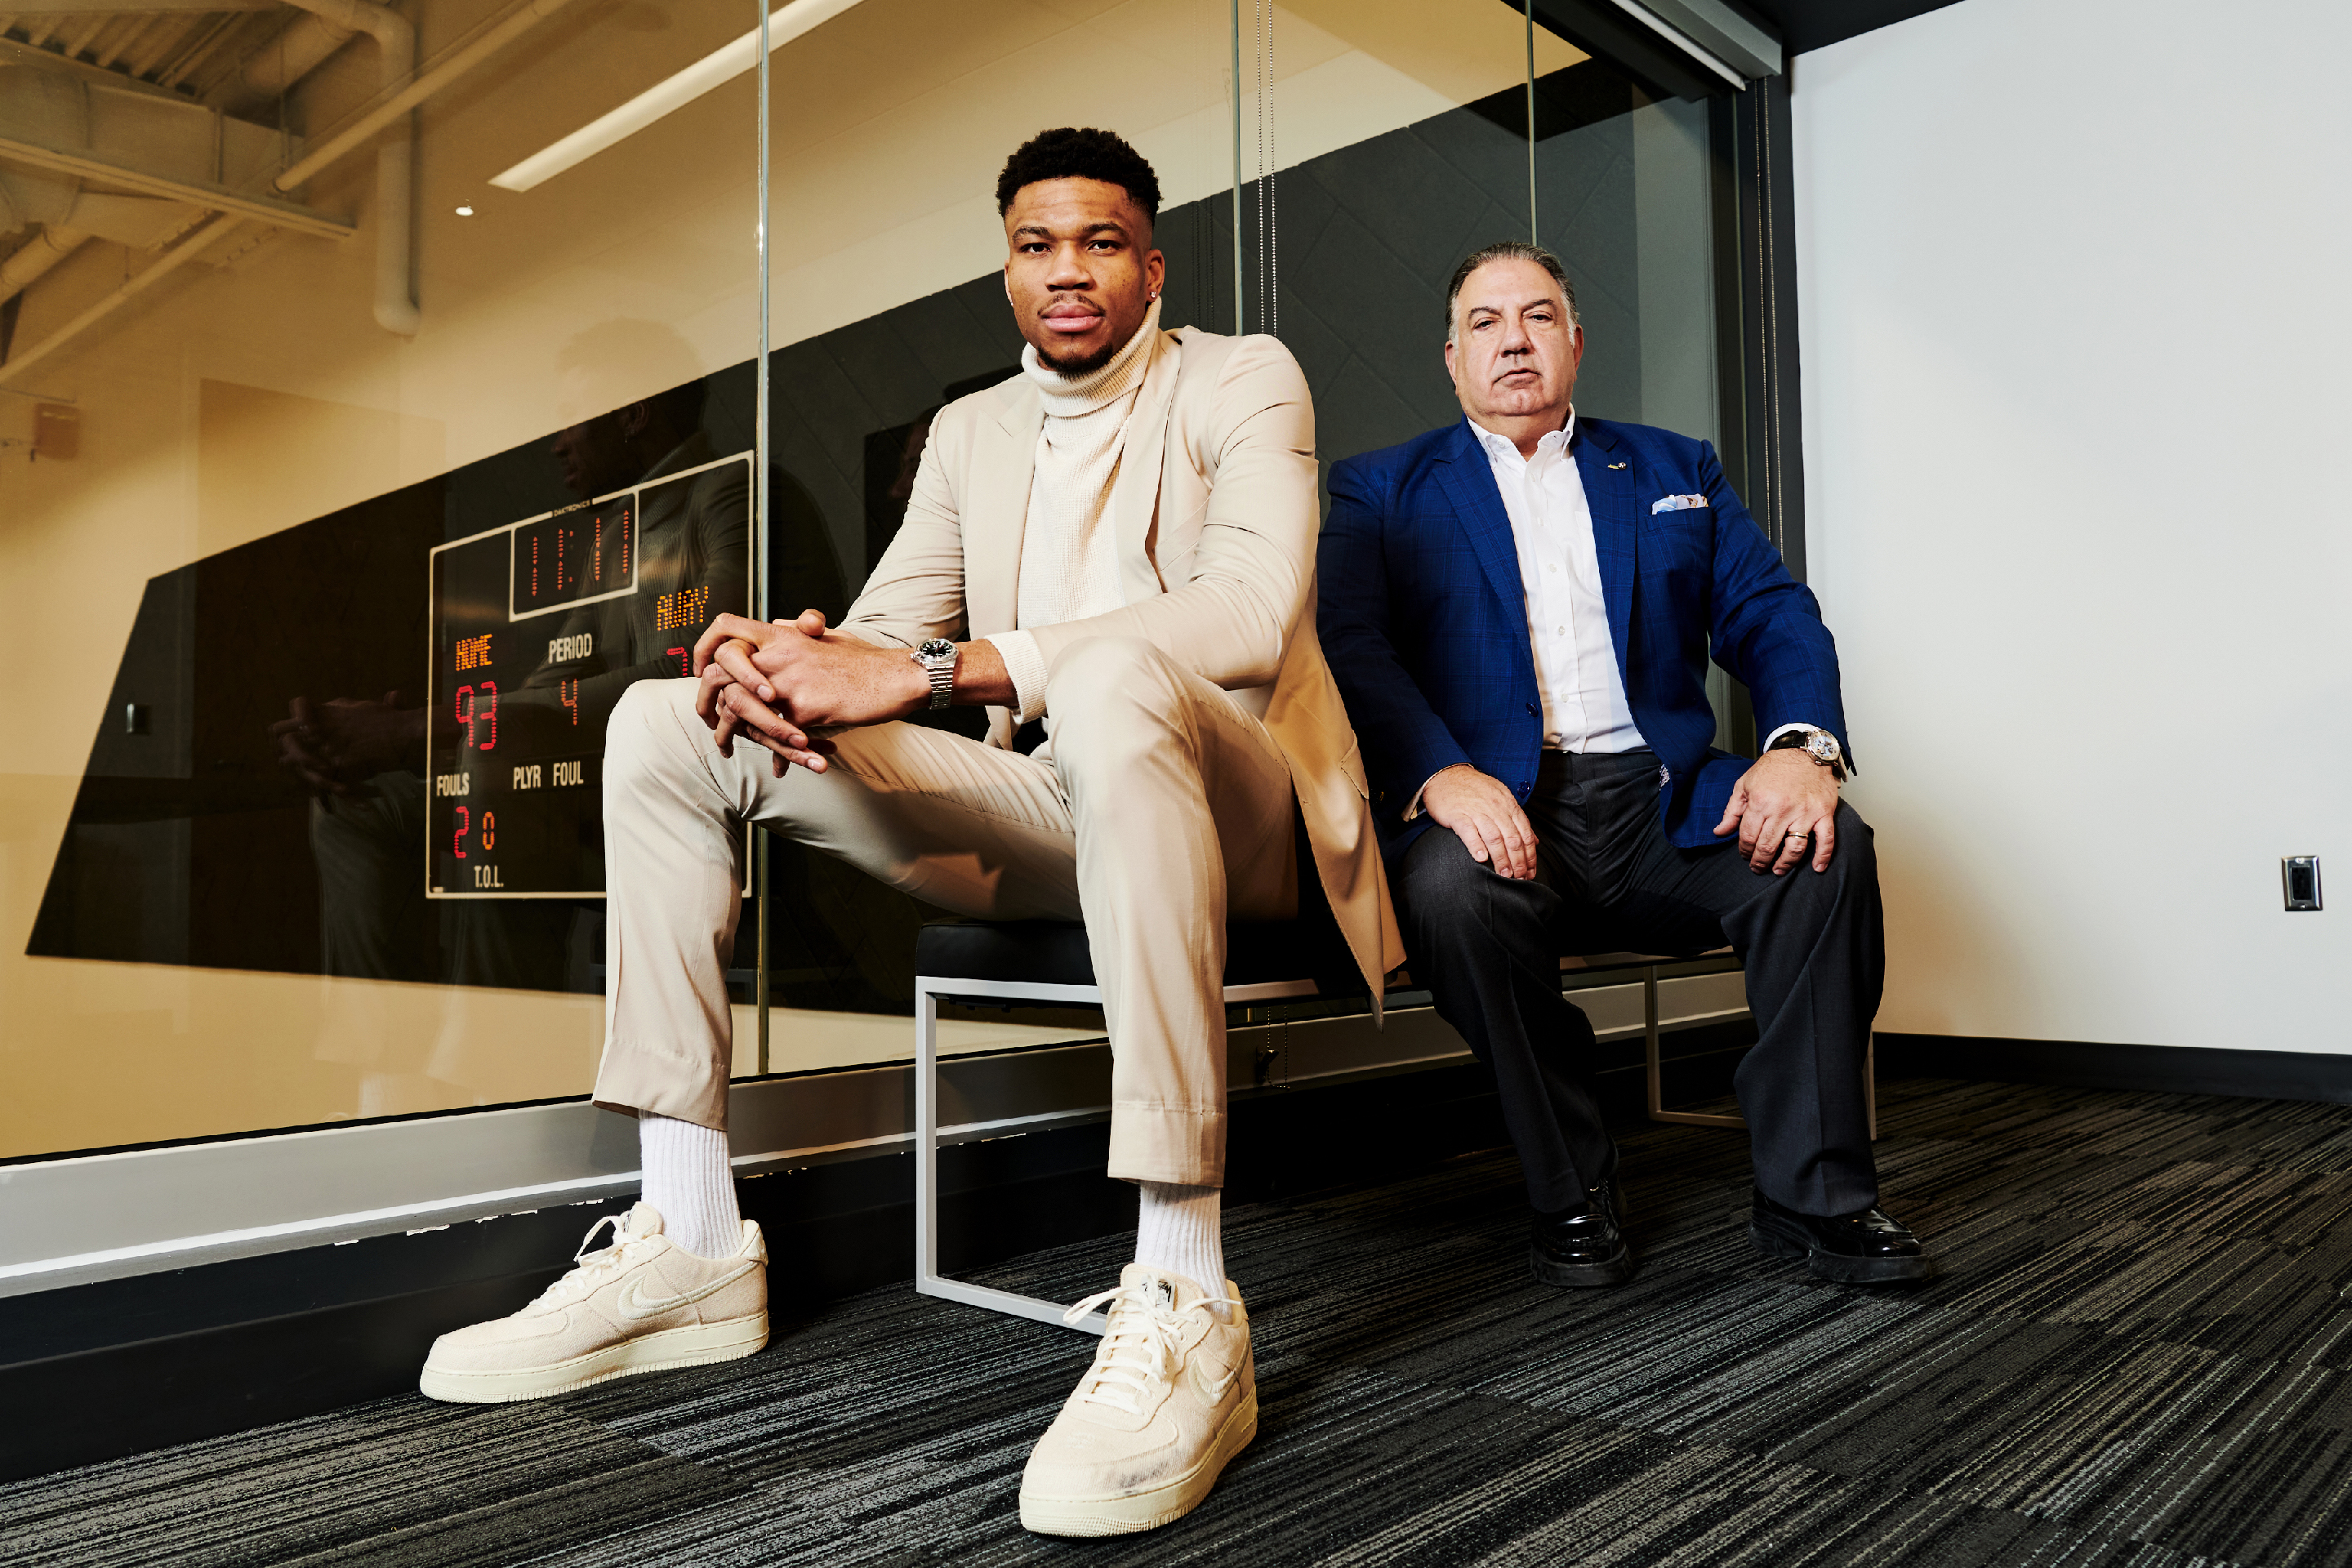 One of the NBA's biggest stars grew up with parents 'scared to trust people with their money.' Now, he's dedicated to make others feel safe investing | Fortune